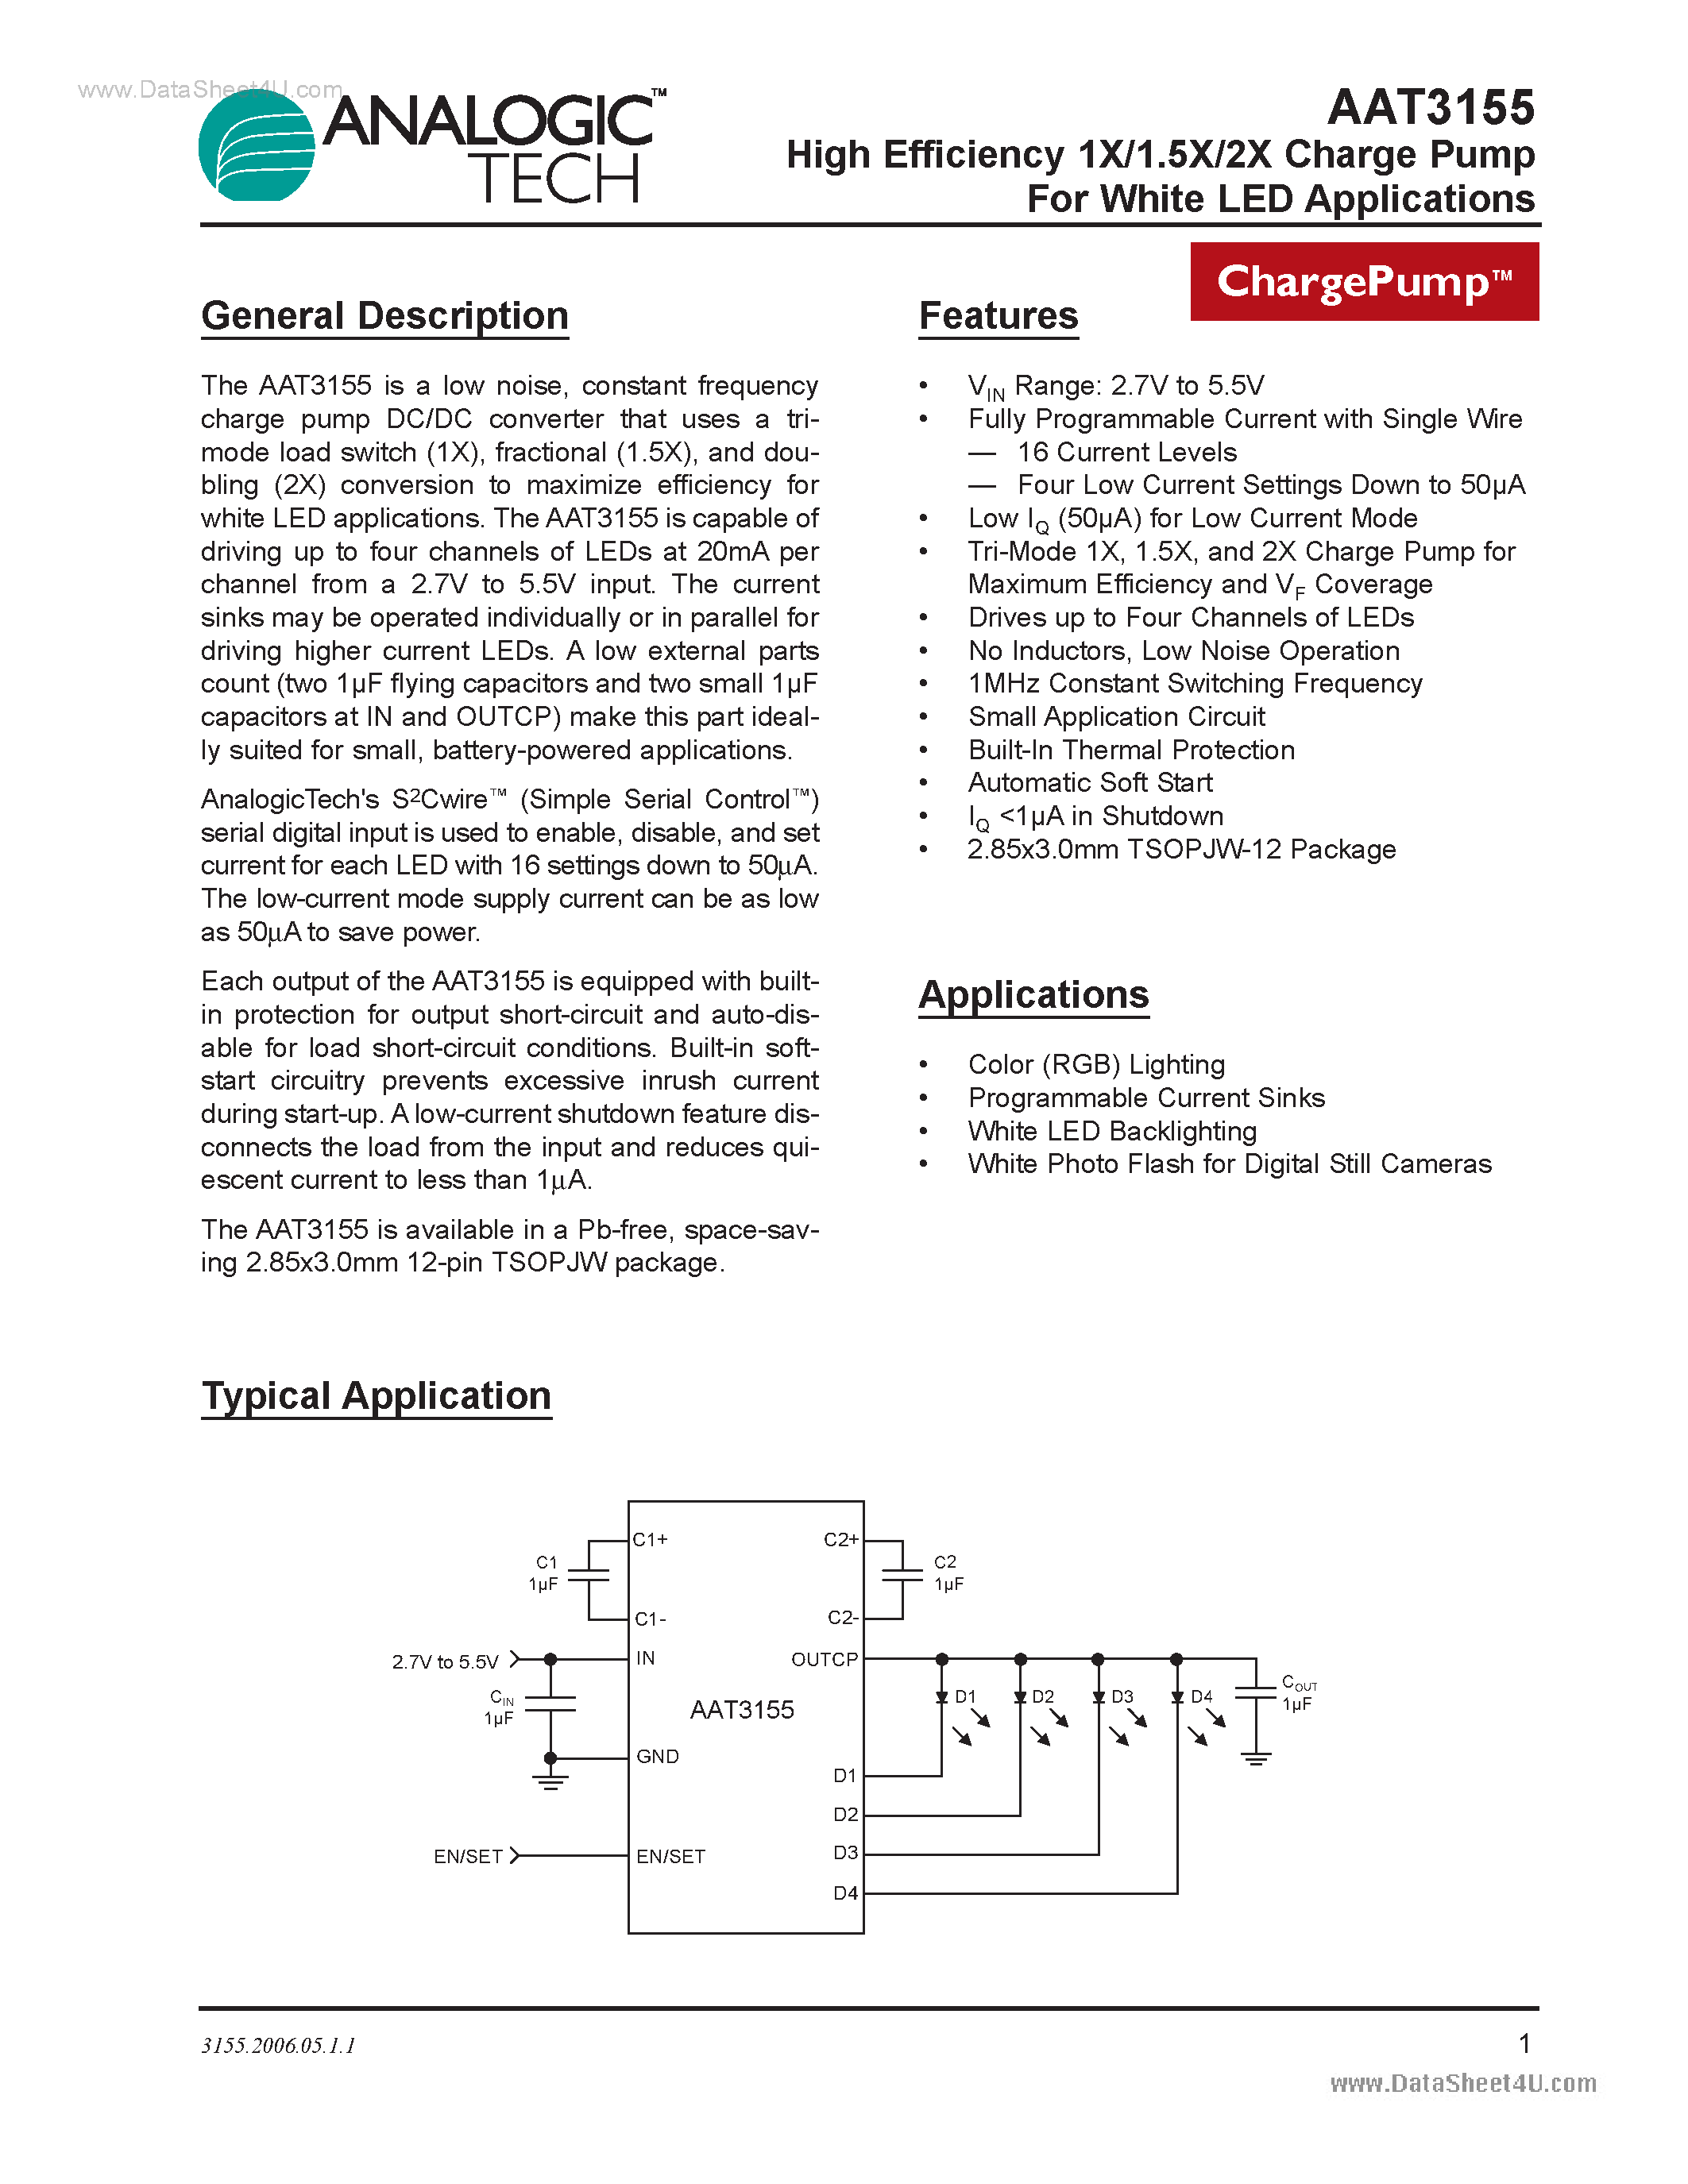 Datasheet AAT3155 - High Efficiency 1X/1.5X/2X Charge Pump page 1